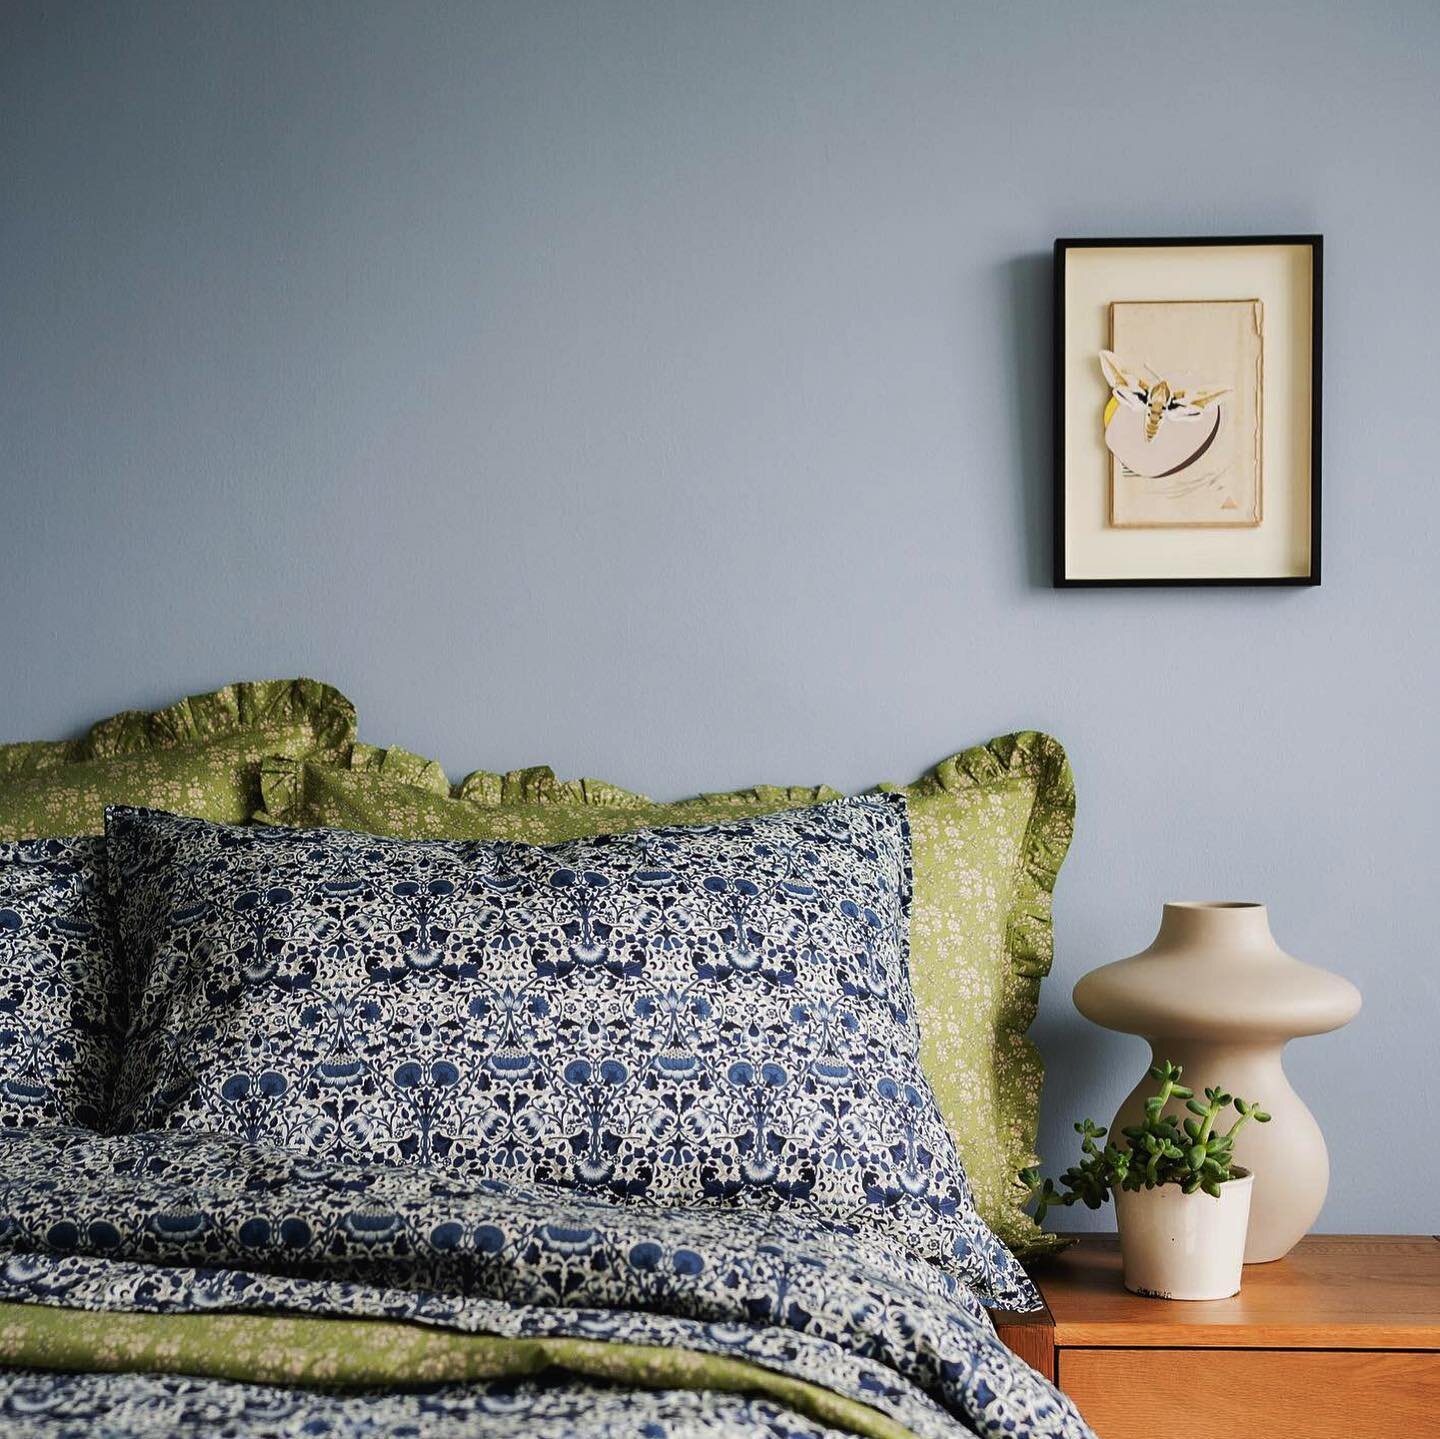 I was so honoured to have my collages featured in the recent @cocoandwolf 10 year anniversary shoot✨. Their bedding is super special, all made in the UK and stocked in @libertylondon no less💚. Thank you @cocoandwolf for featuring my work✨.
.
.
#bedr